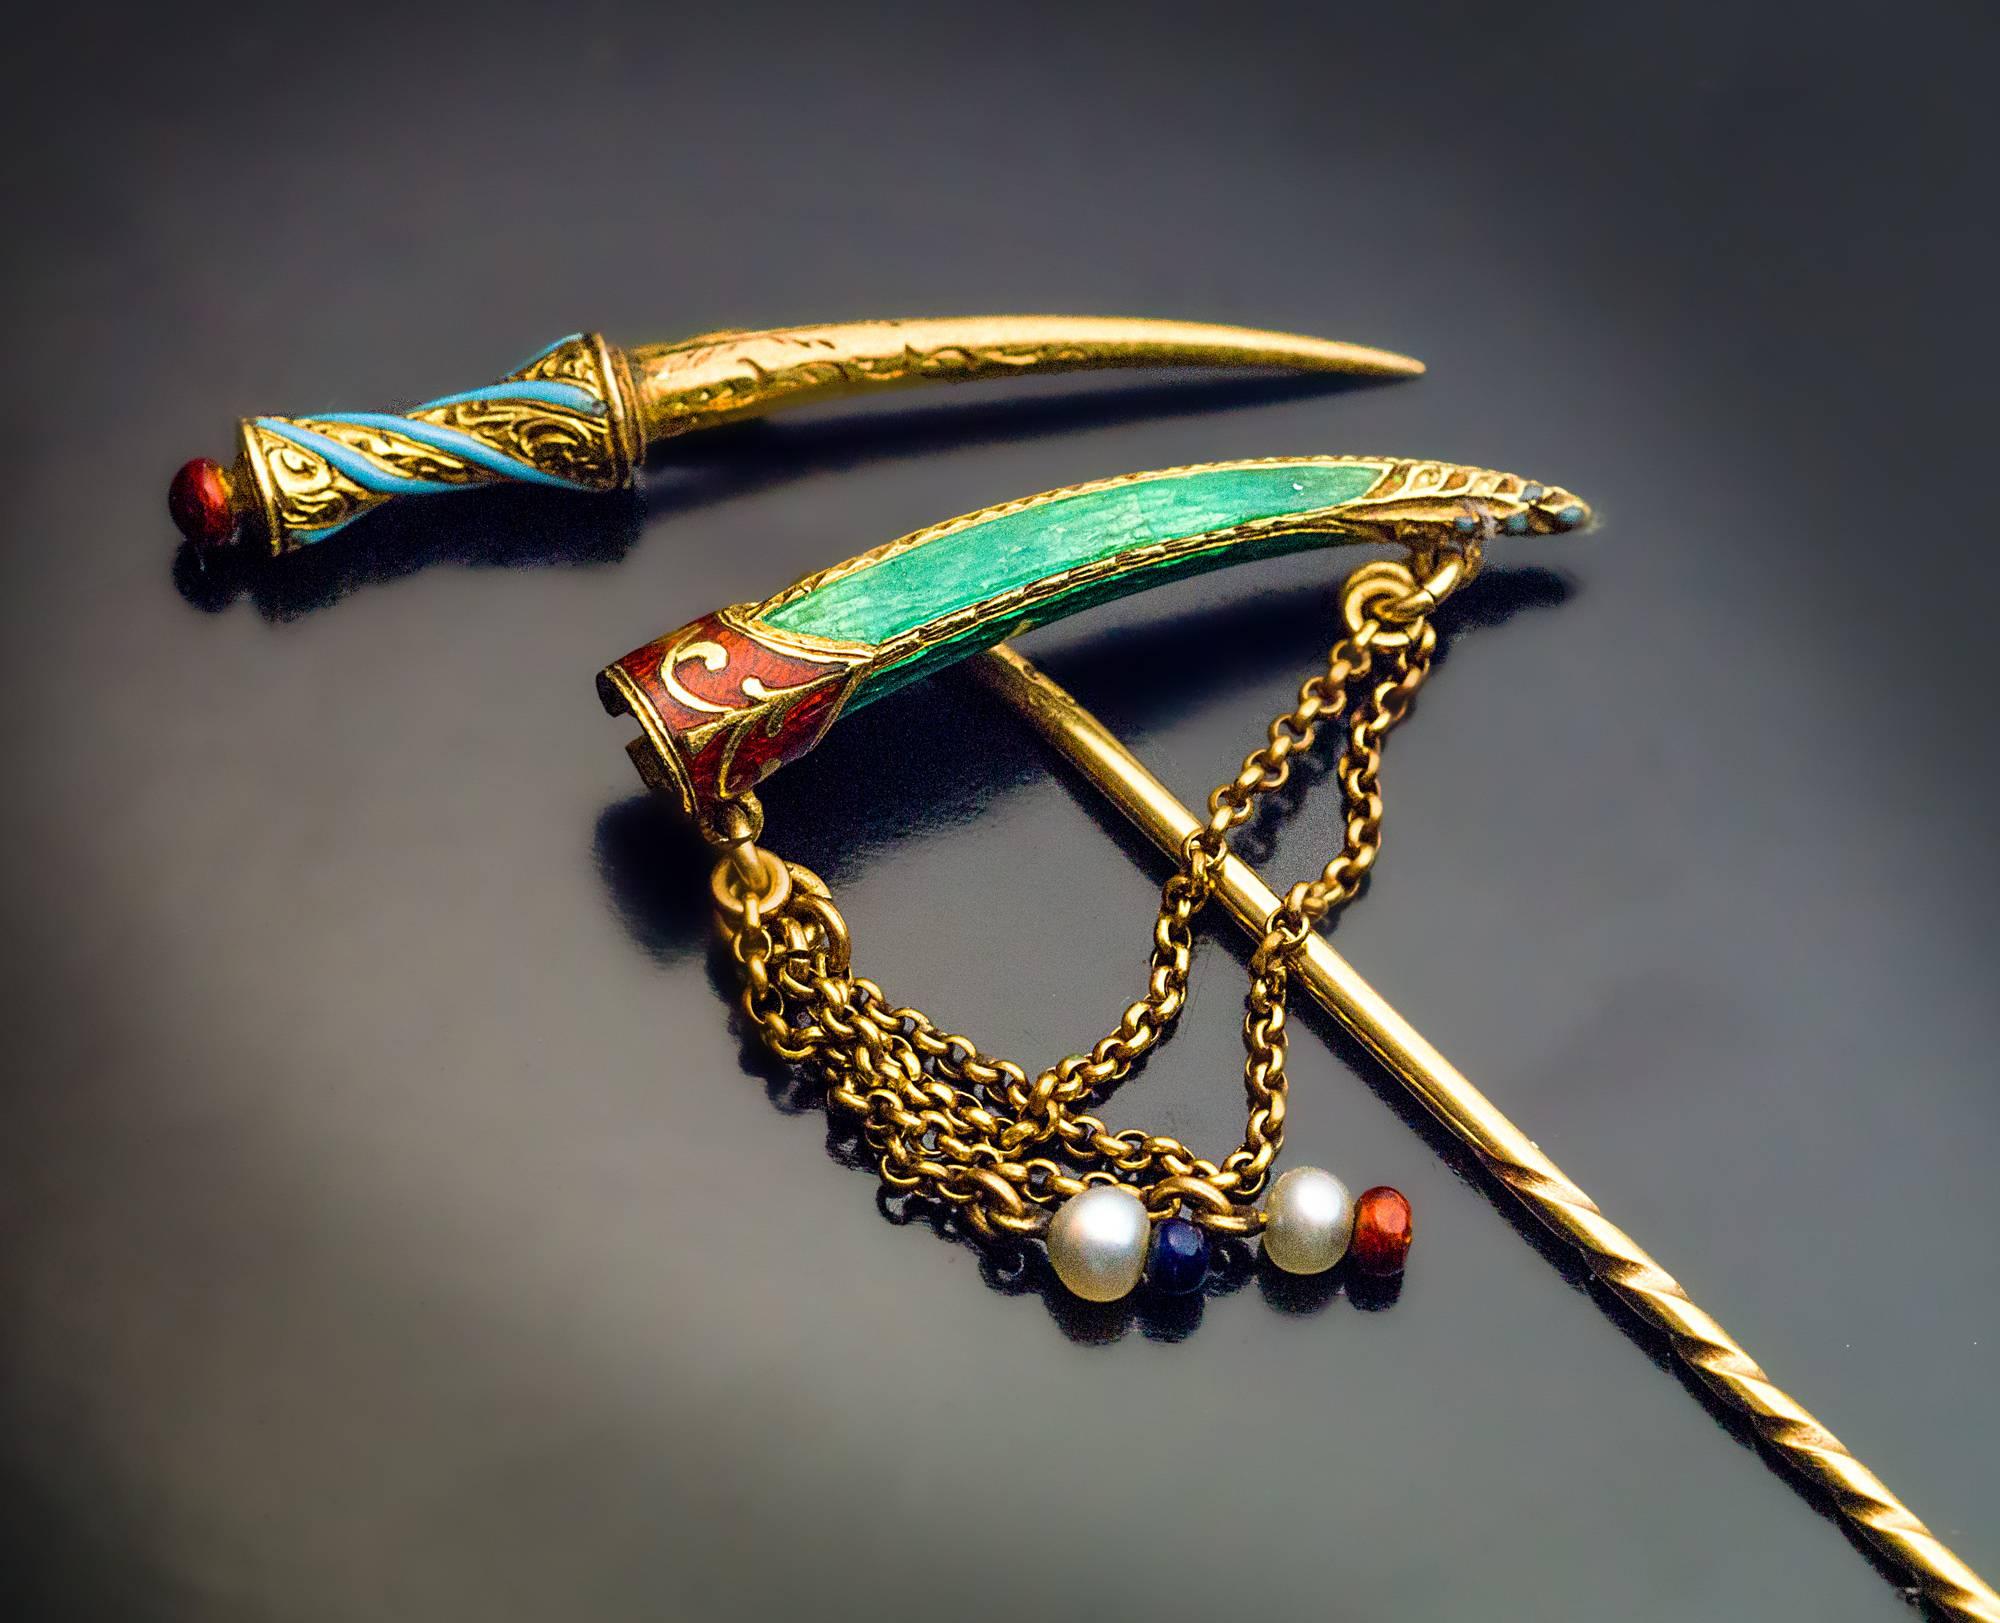 Made in the late 1870s

The 18K gold stickpin is naturalistically modeled as a miniature Turkish dagger embellished with red & green guilloche enamel, turquoise opaque enamel, pearl and enamel beads hanging on two gold chains.

It is a rare